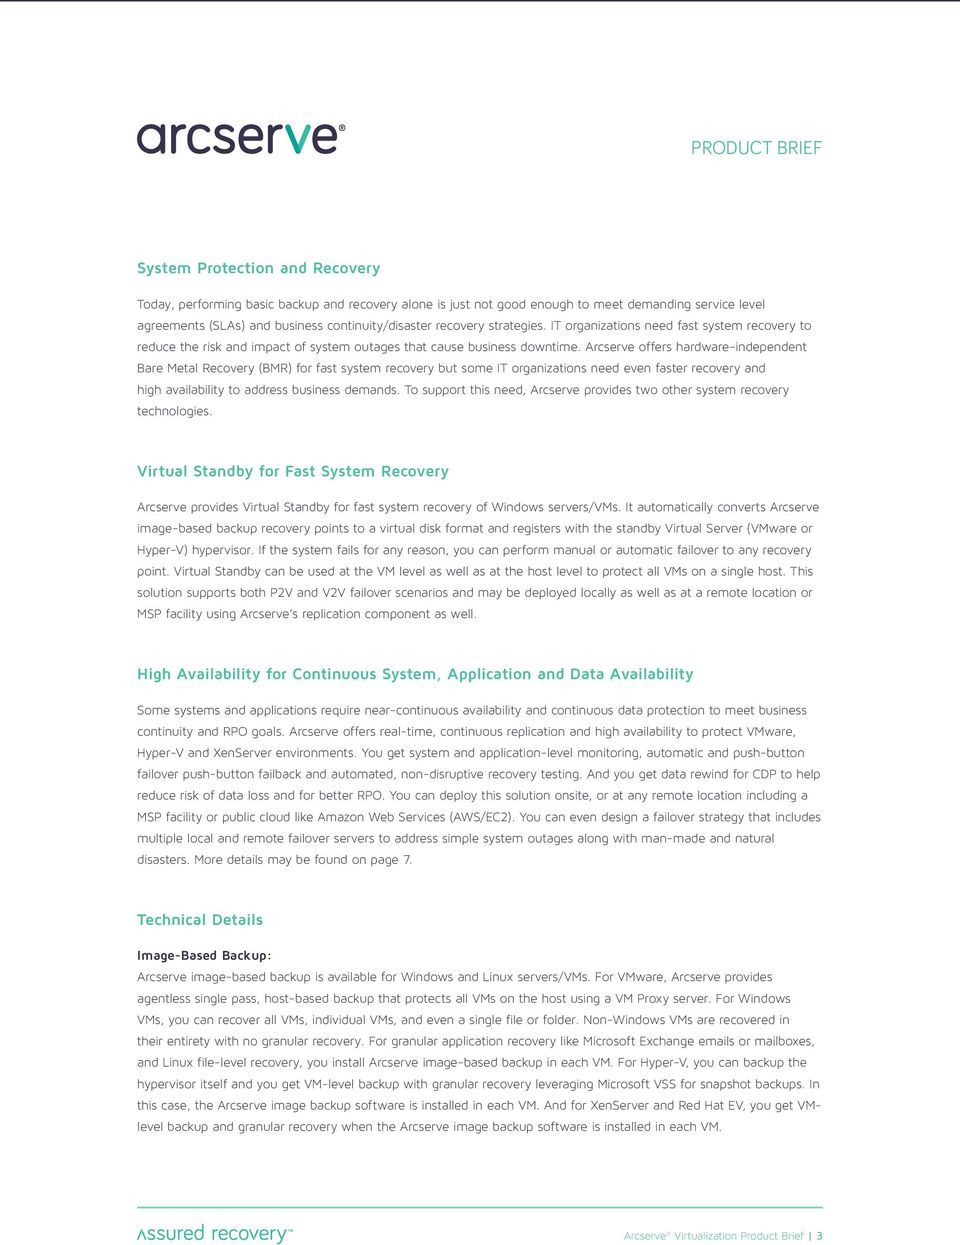 Arcserve offers hardware-independent Bare Metal Recovery (BMR) for fast system recovery but some IT organizations need even faster recovery and high availability to address business demands.